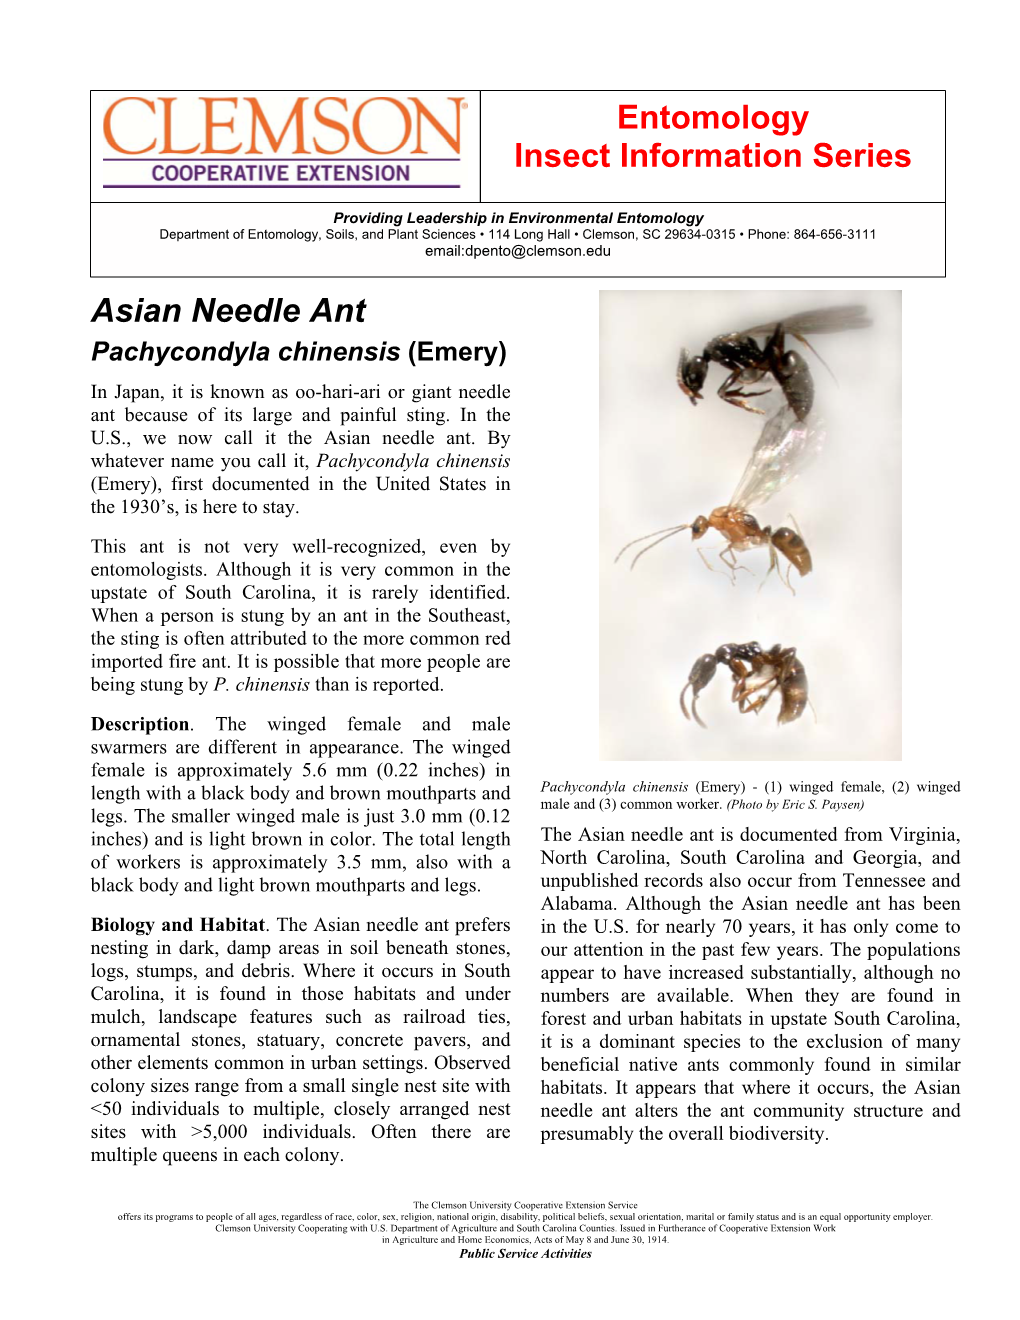 Entomology Insect Information Series Asian Needle